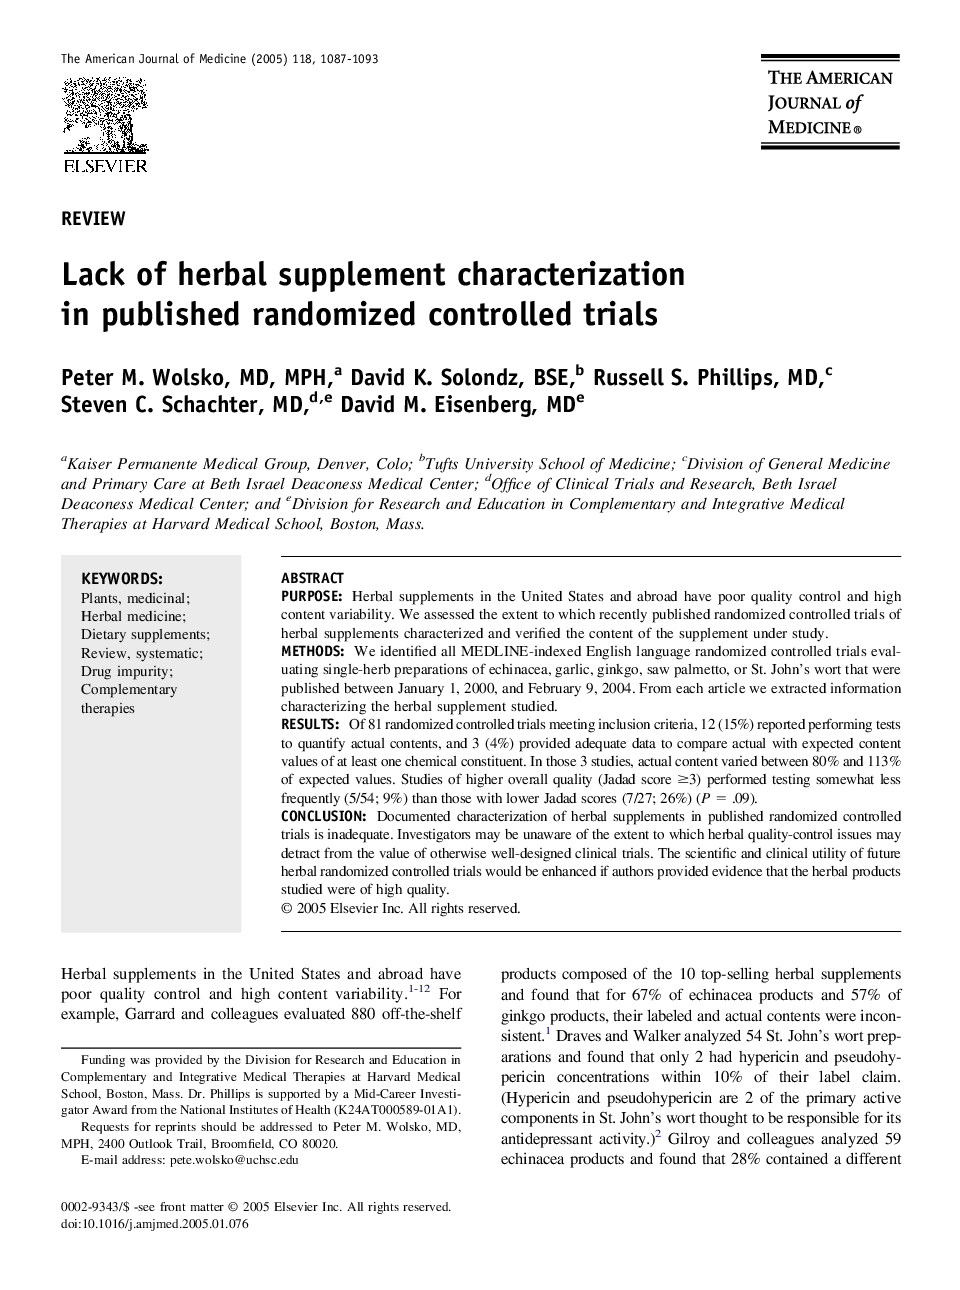 Lack of herbal supplement characterization in published randomized controlled trials